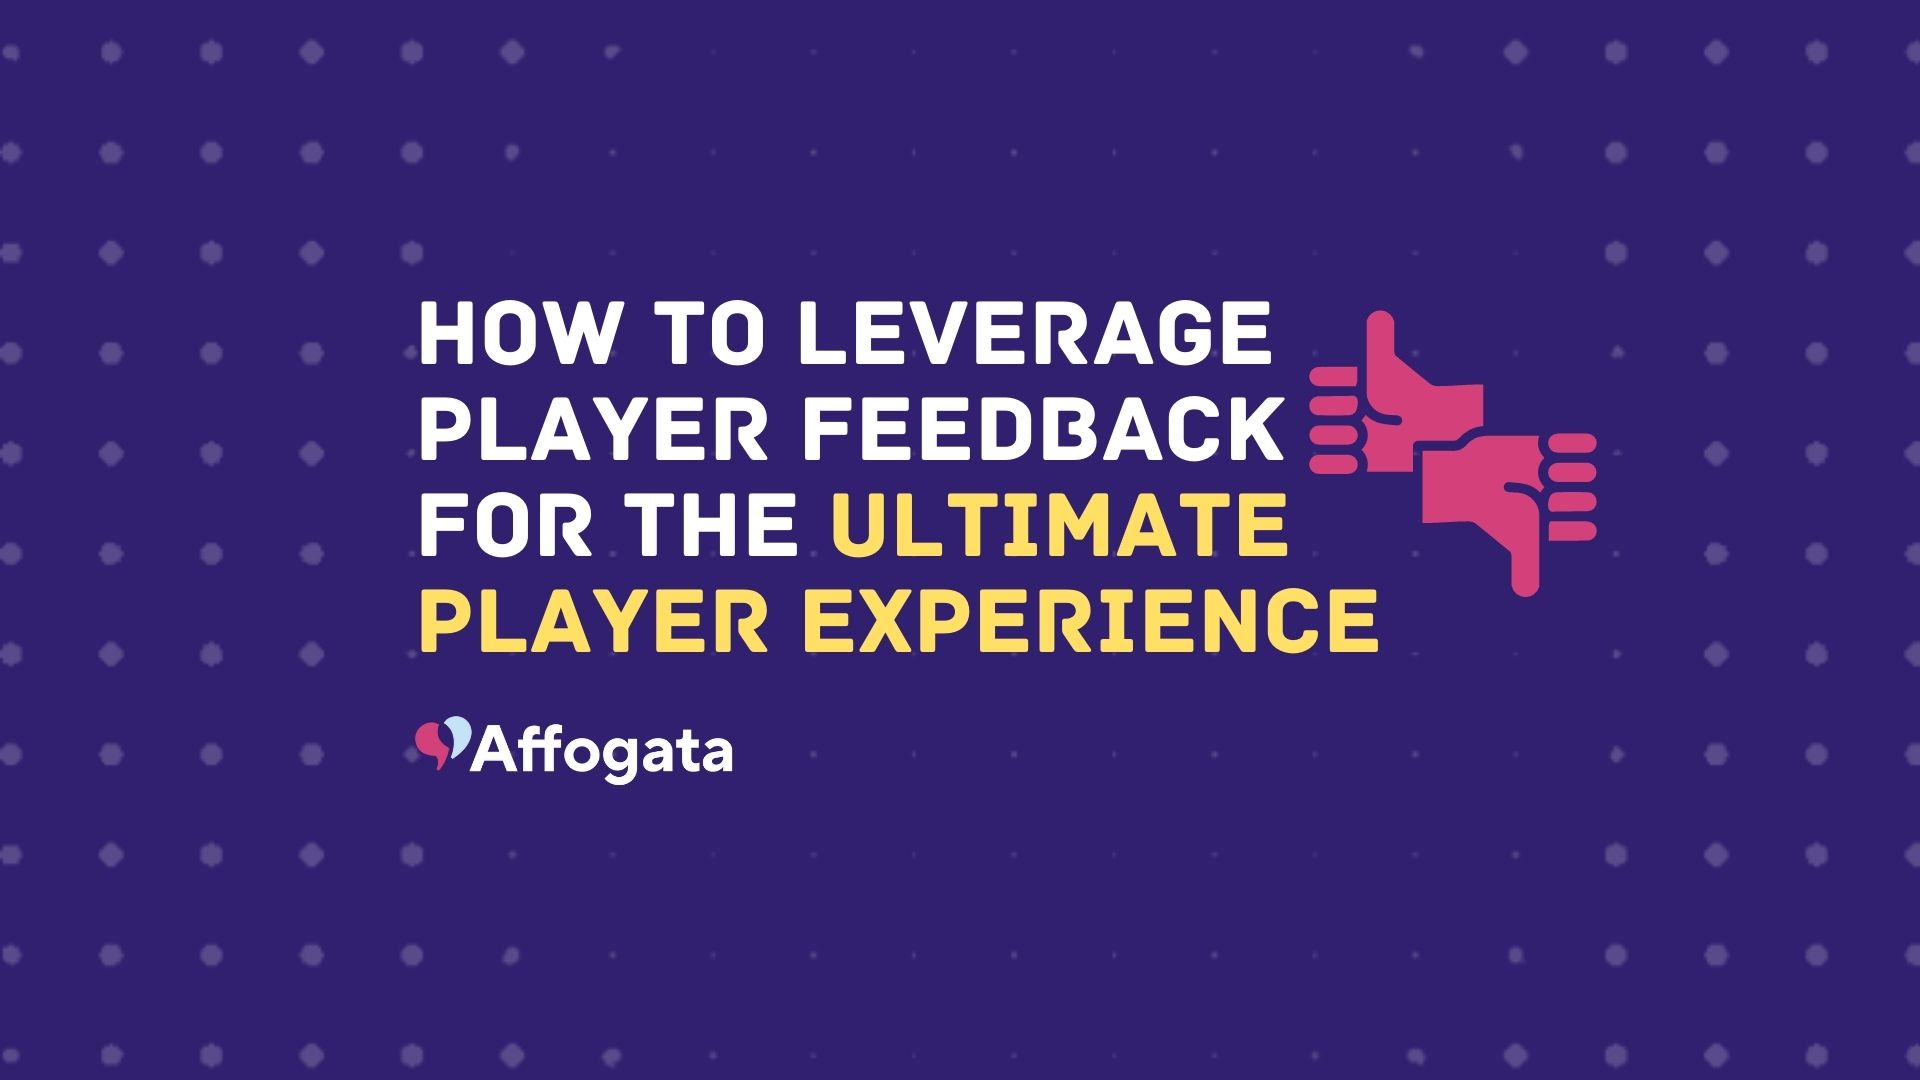 How to leverage player feedback for the ultimate player experience